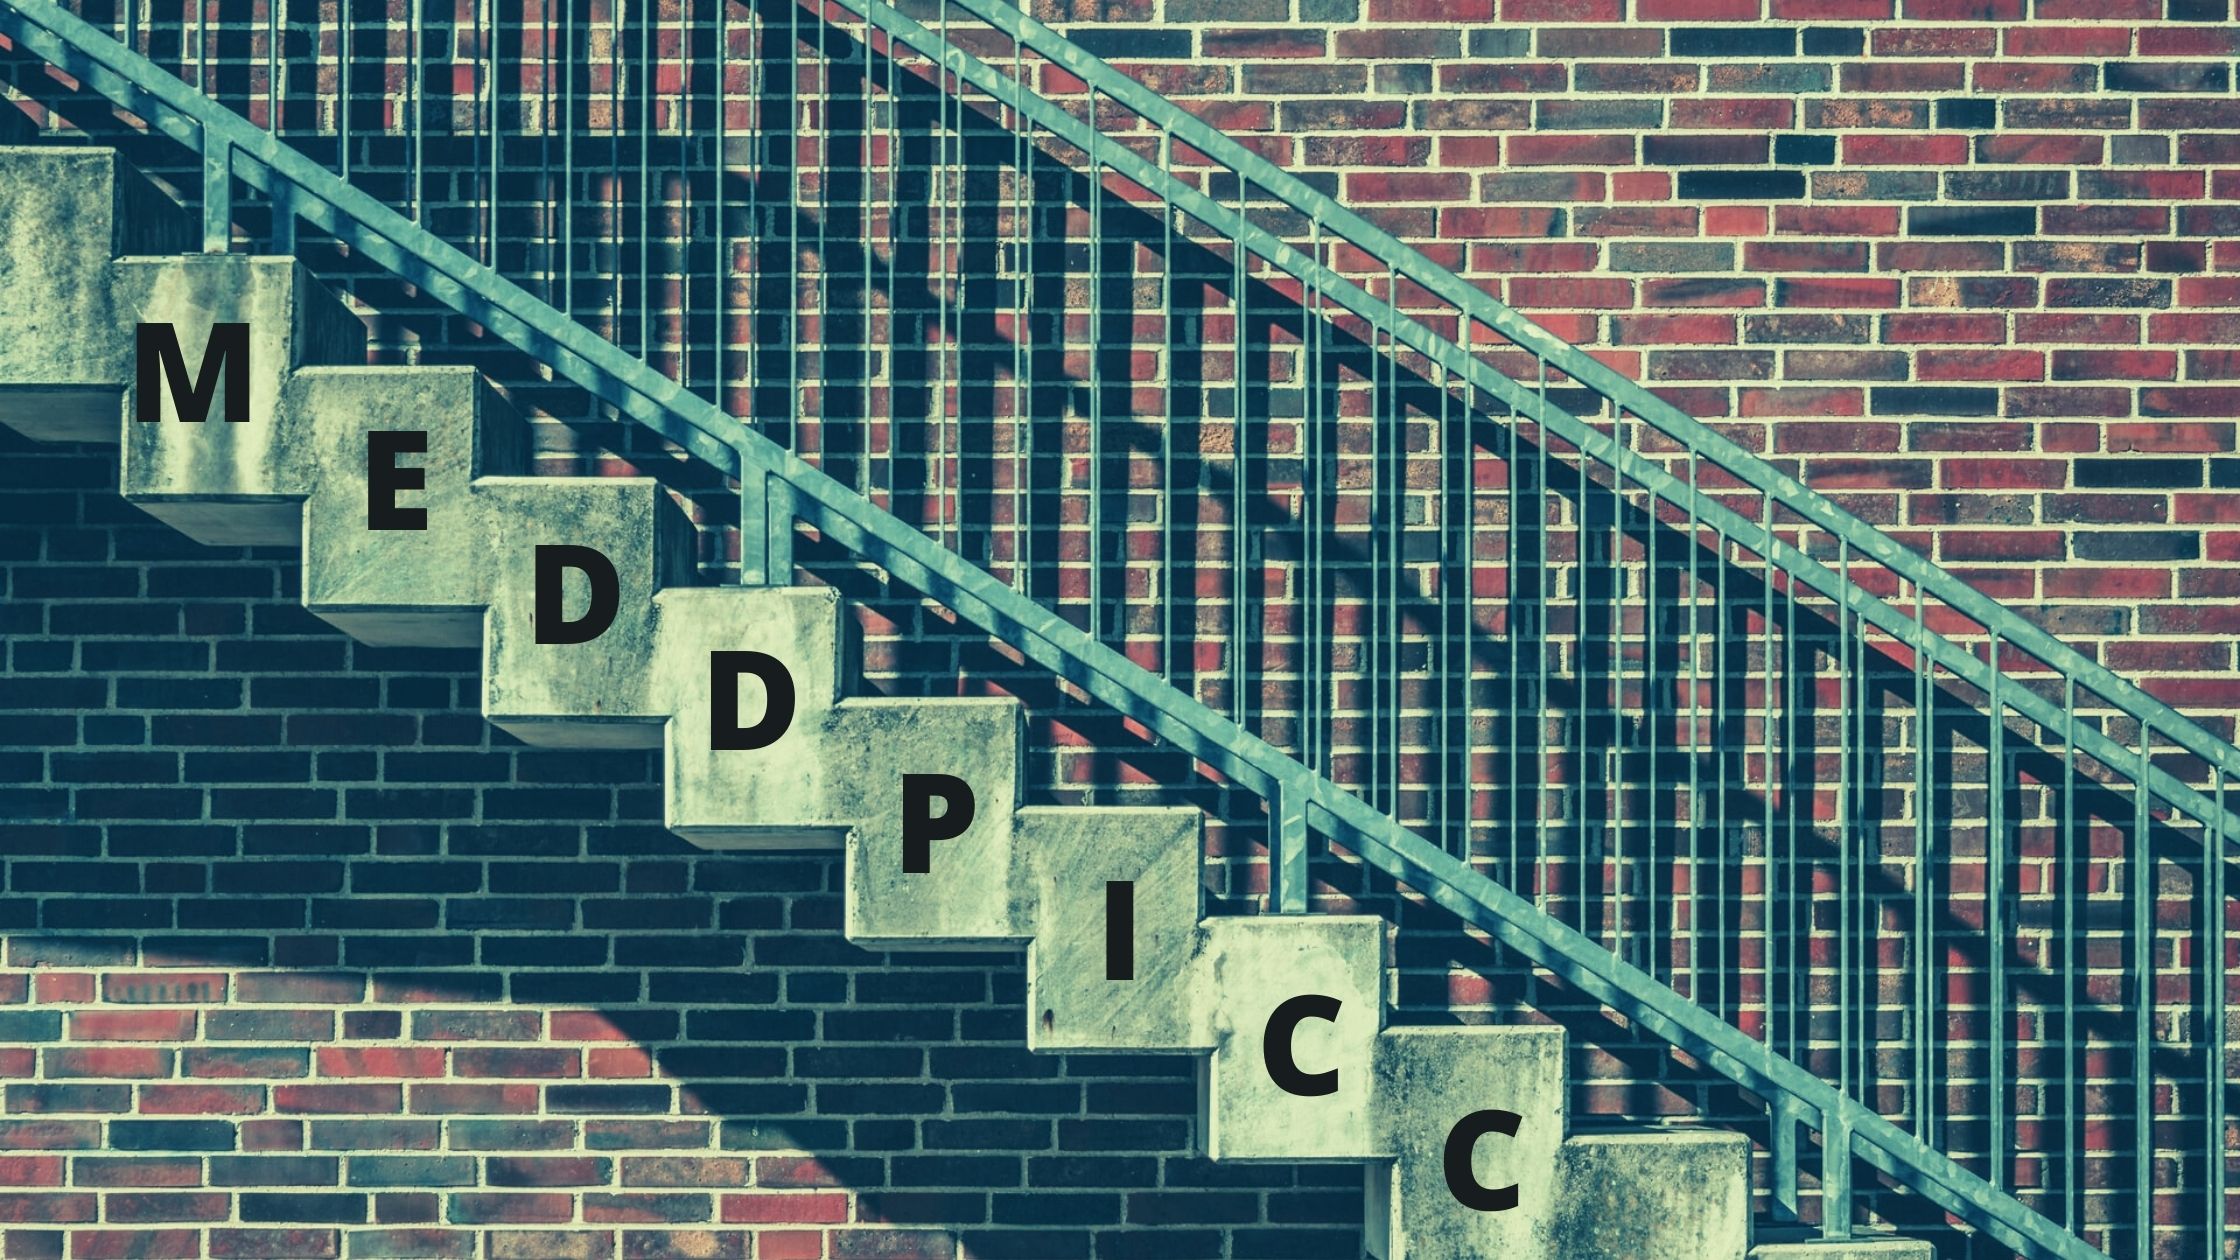 The Eight Letter Word That Can Supercharge Your Enterprise Sales (MEDDPICC)